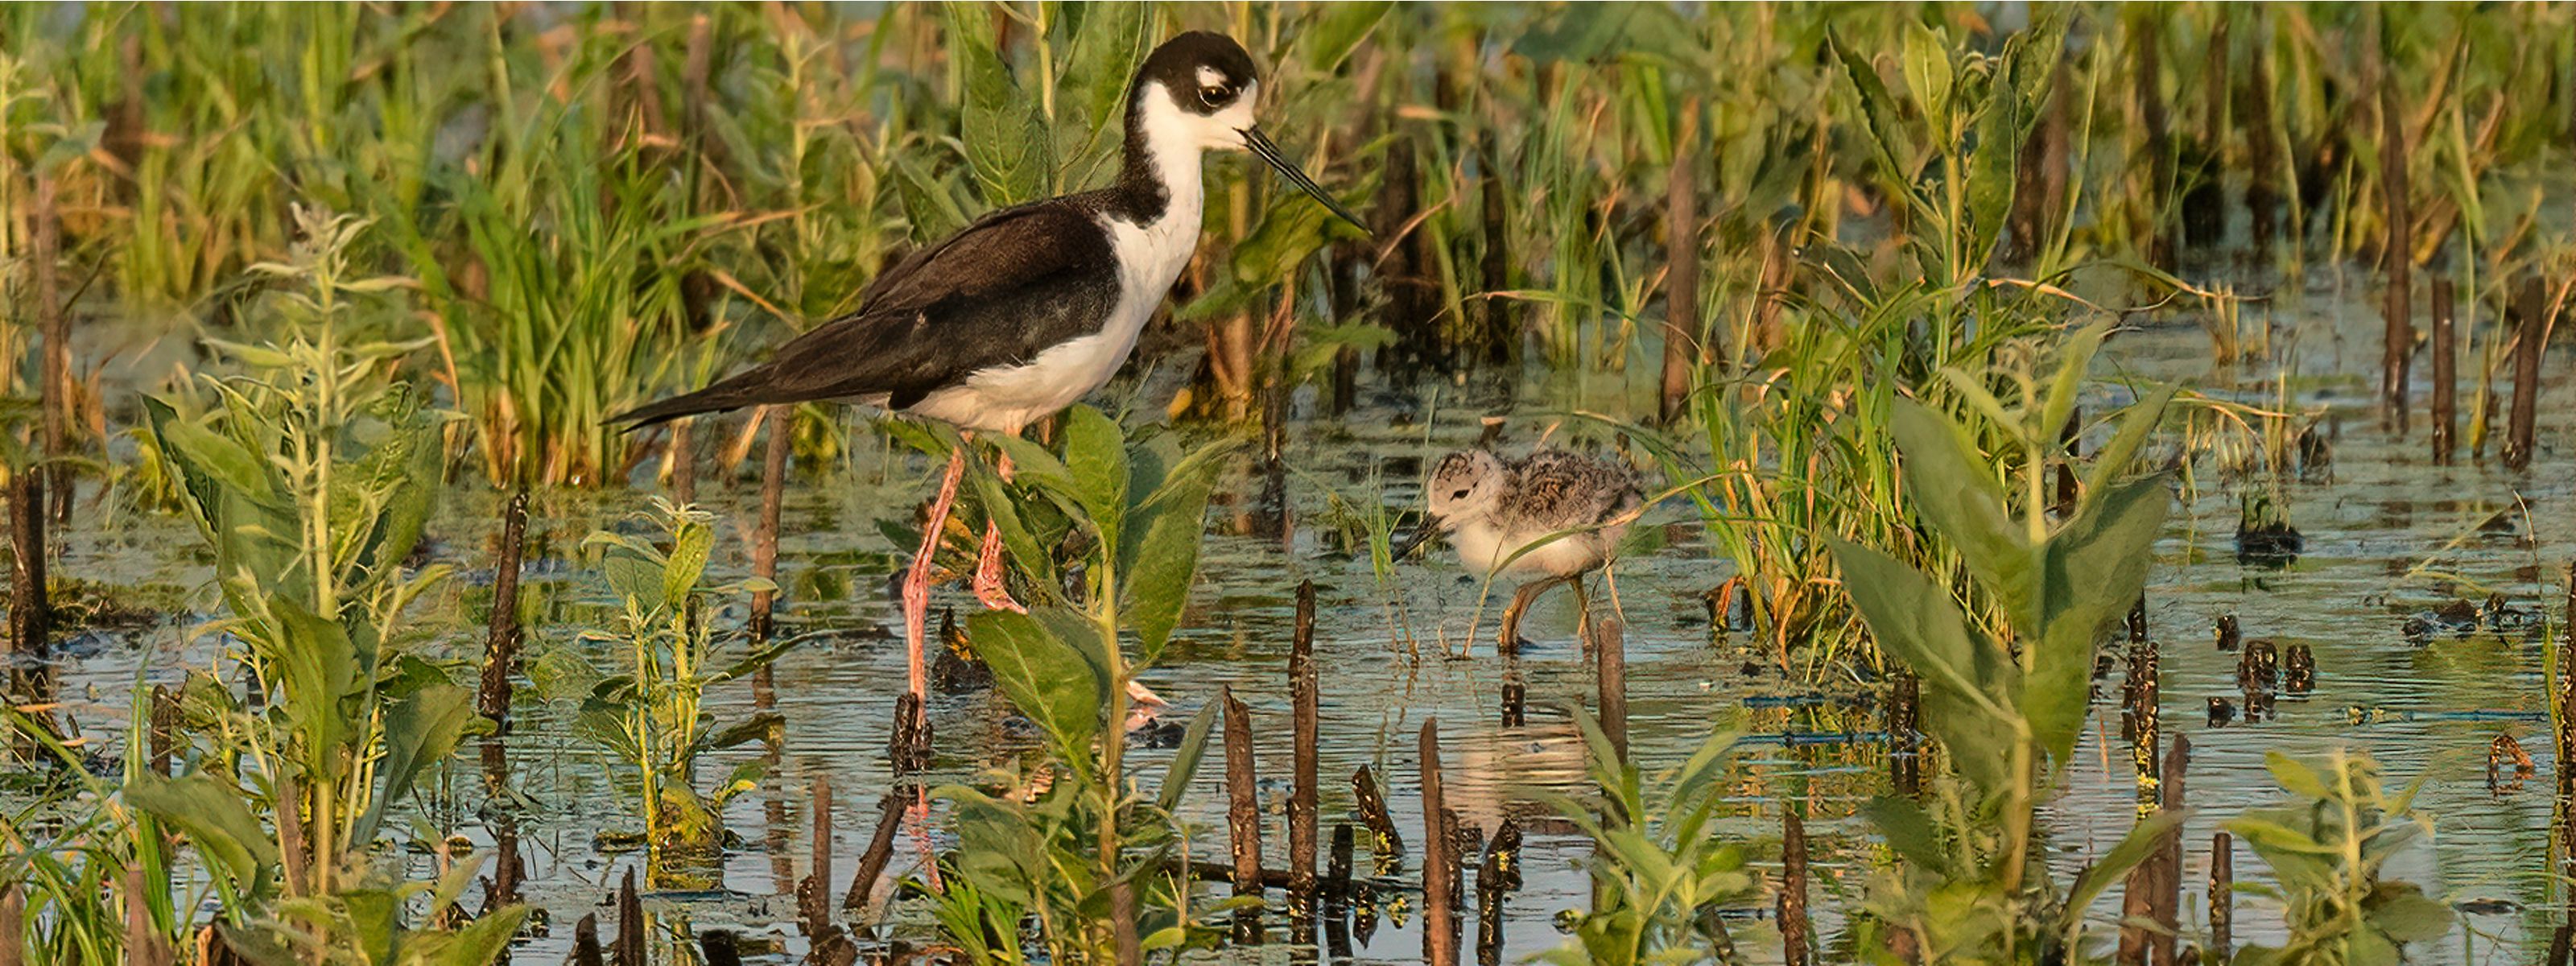 A small white and brown bird stand next to a larger white and brown bird in a marsh.